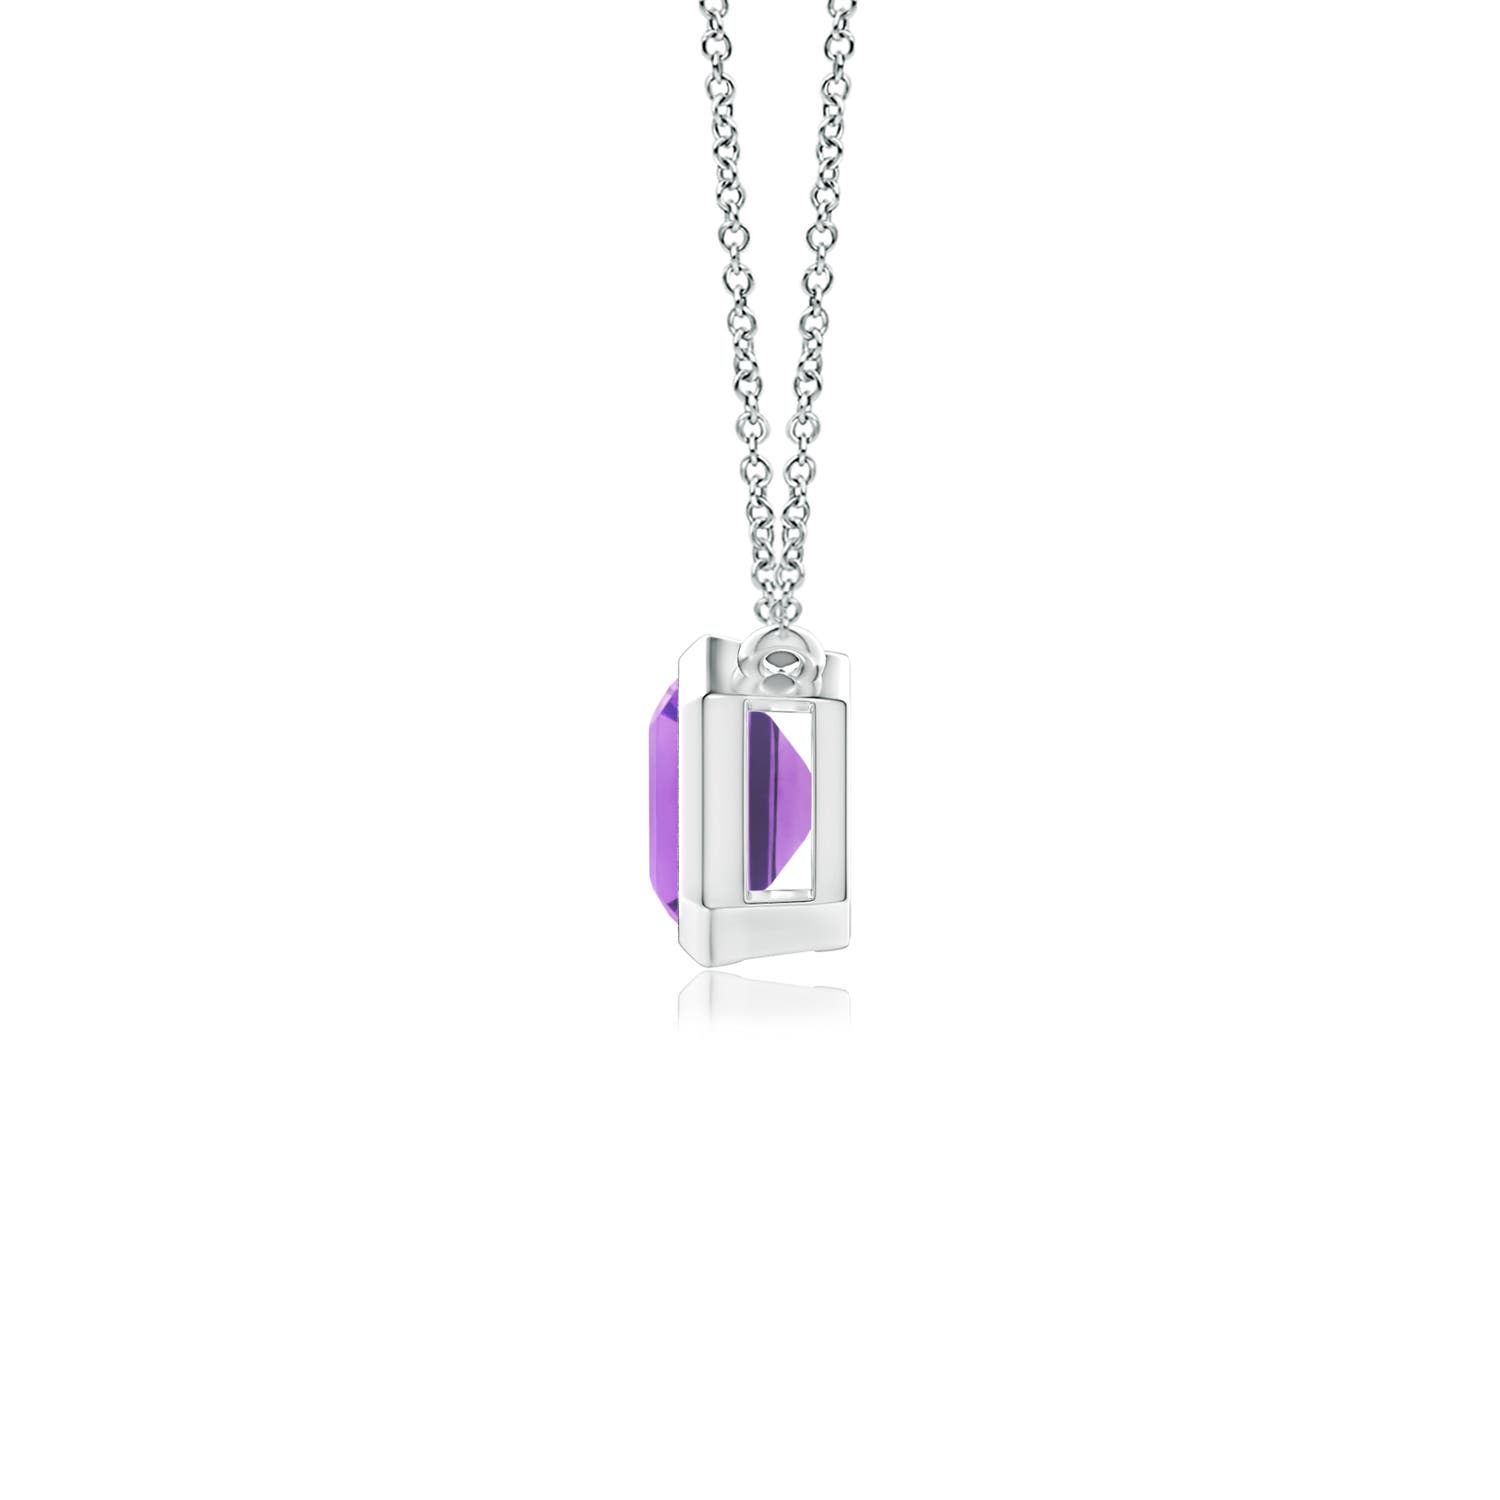 AA - Amethyst / 0.9 CT / 14 KT White Gold